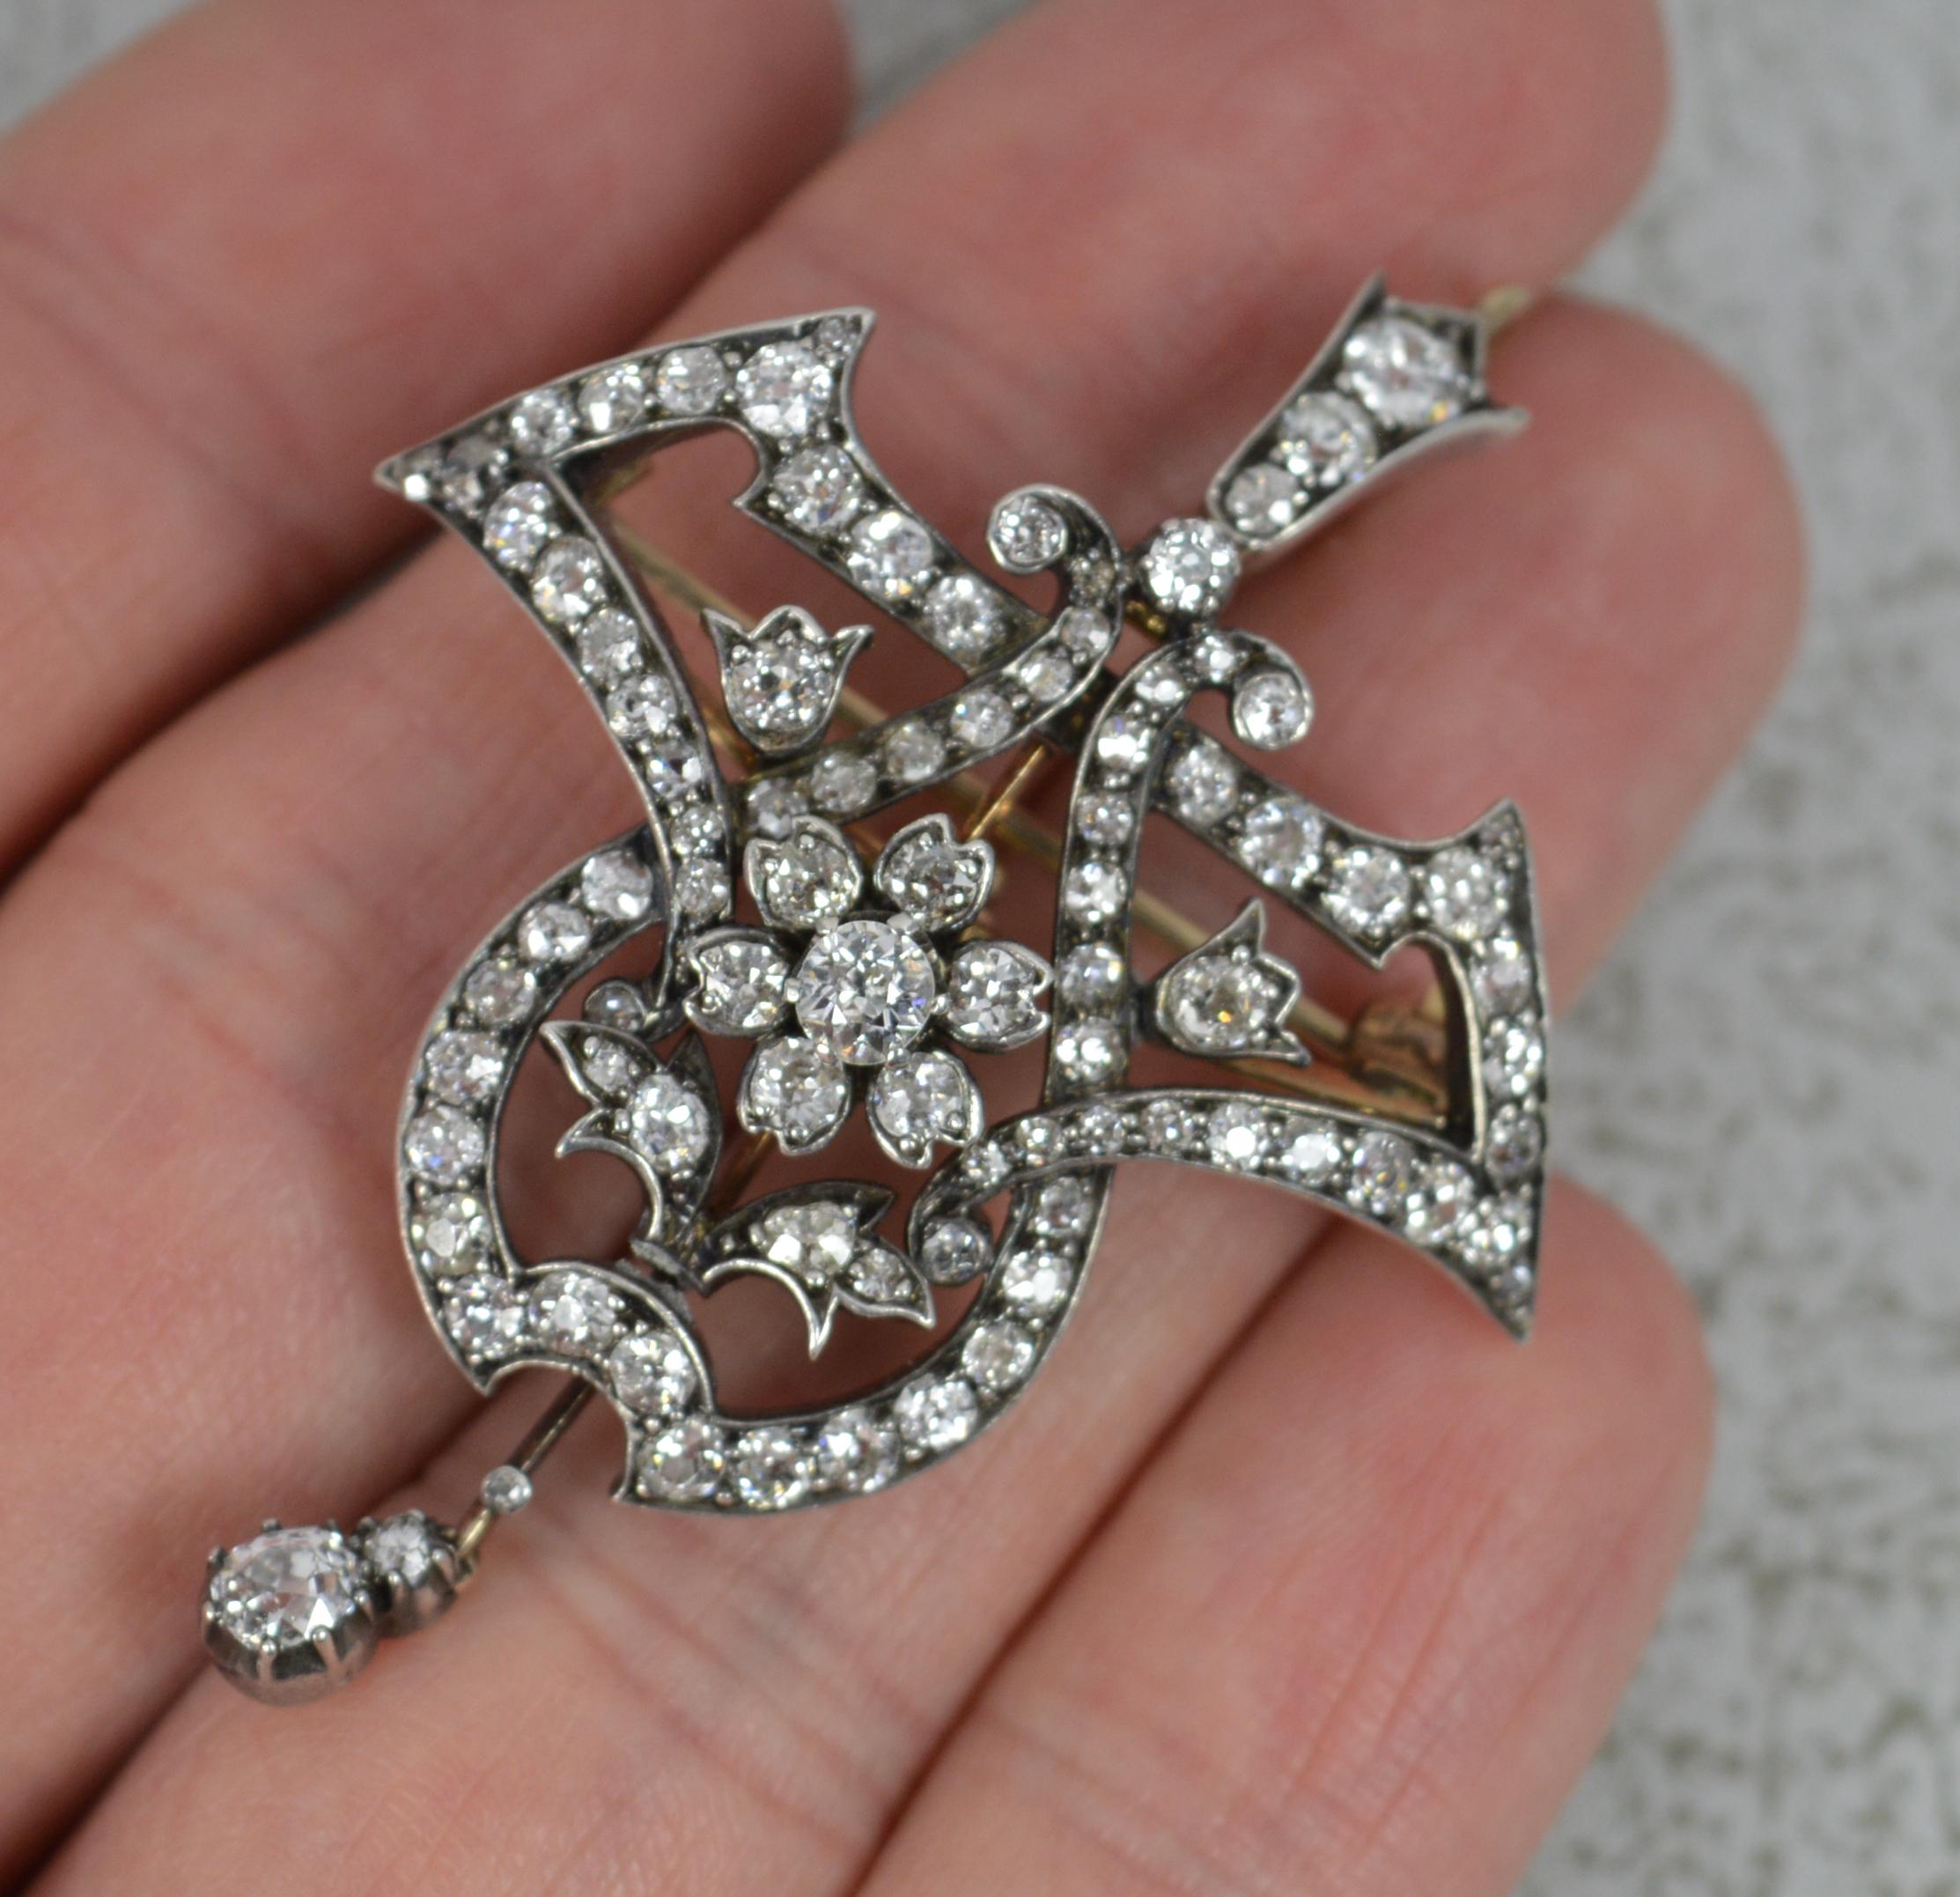 A stunning mid Victorian period pendant or brooch.
Solid 18 carat rose gold example with silver head front setting.
The piece has been expertly designed with bold lines and shaped. Encrusted throughout with high quality natural, old cut diamonds.